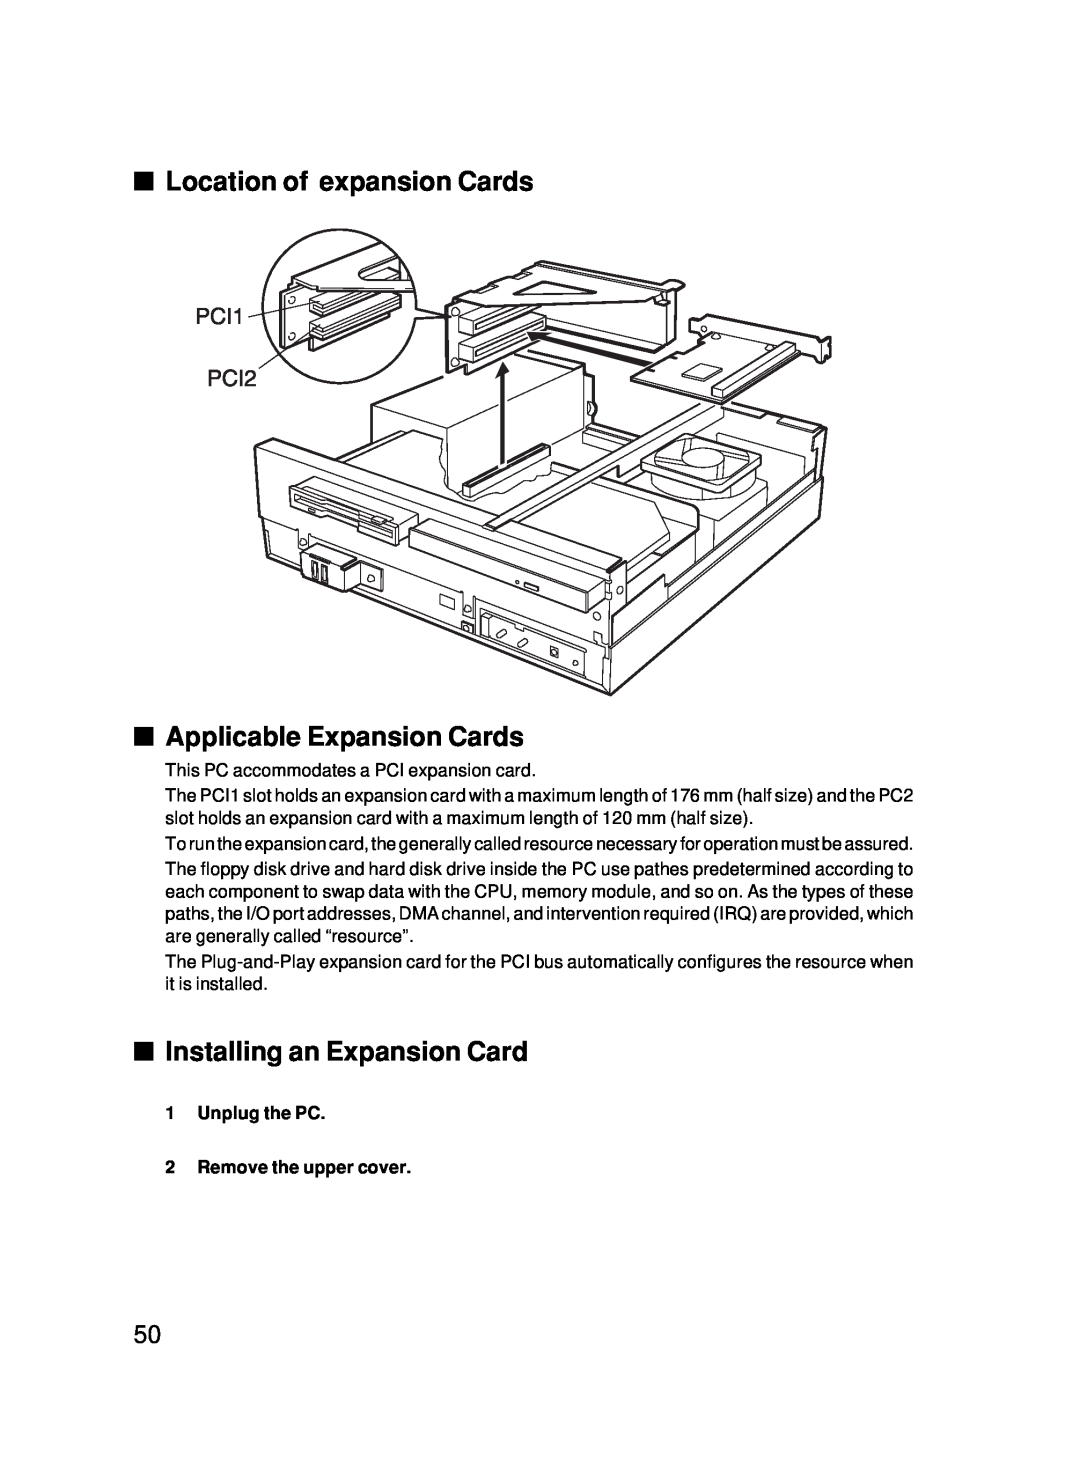 Fujitsu 5000 user manual Location of expansion Cards Applicable Expansion Cards, Installing an Expansion Card 